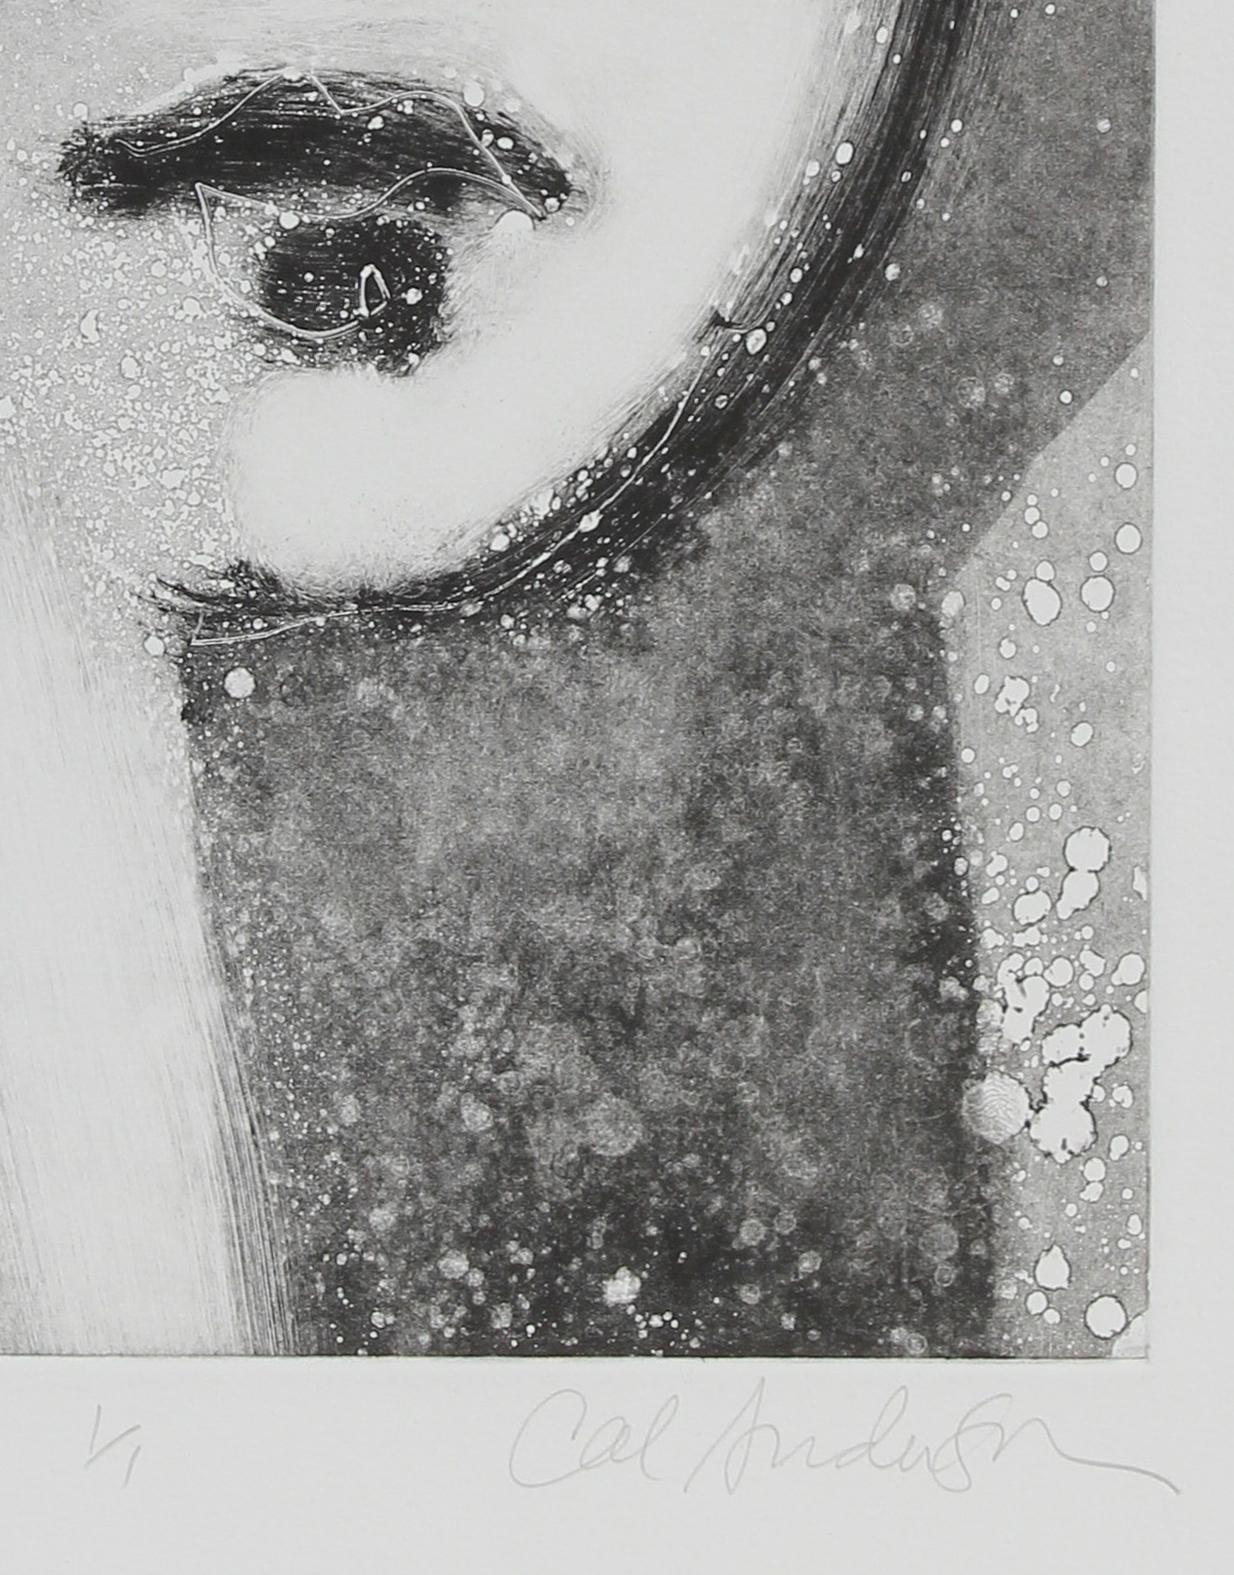 Monochromatic Abstracted Portrait 1990-2000s Monotype - Black Figurative Print by Calvin Anderson